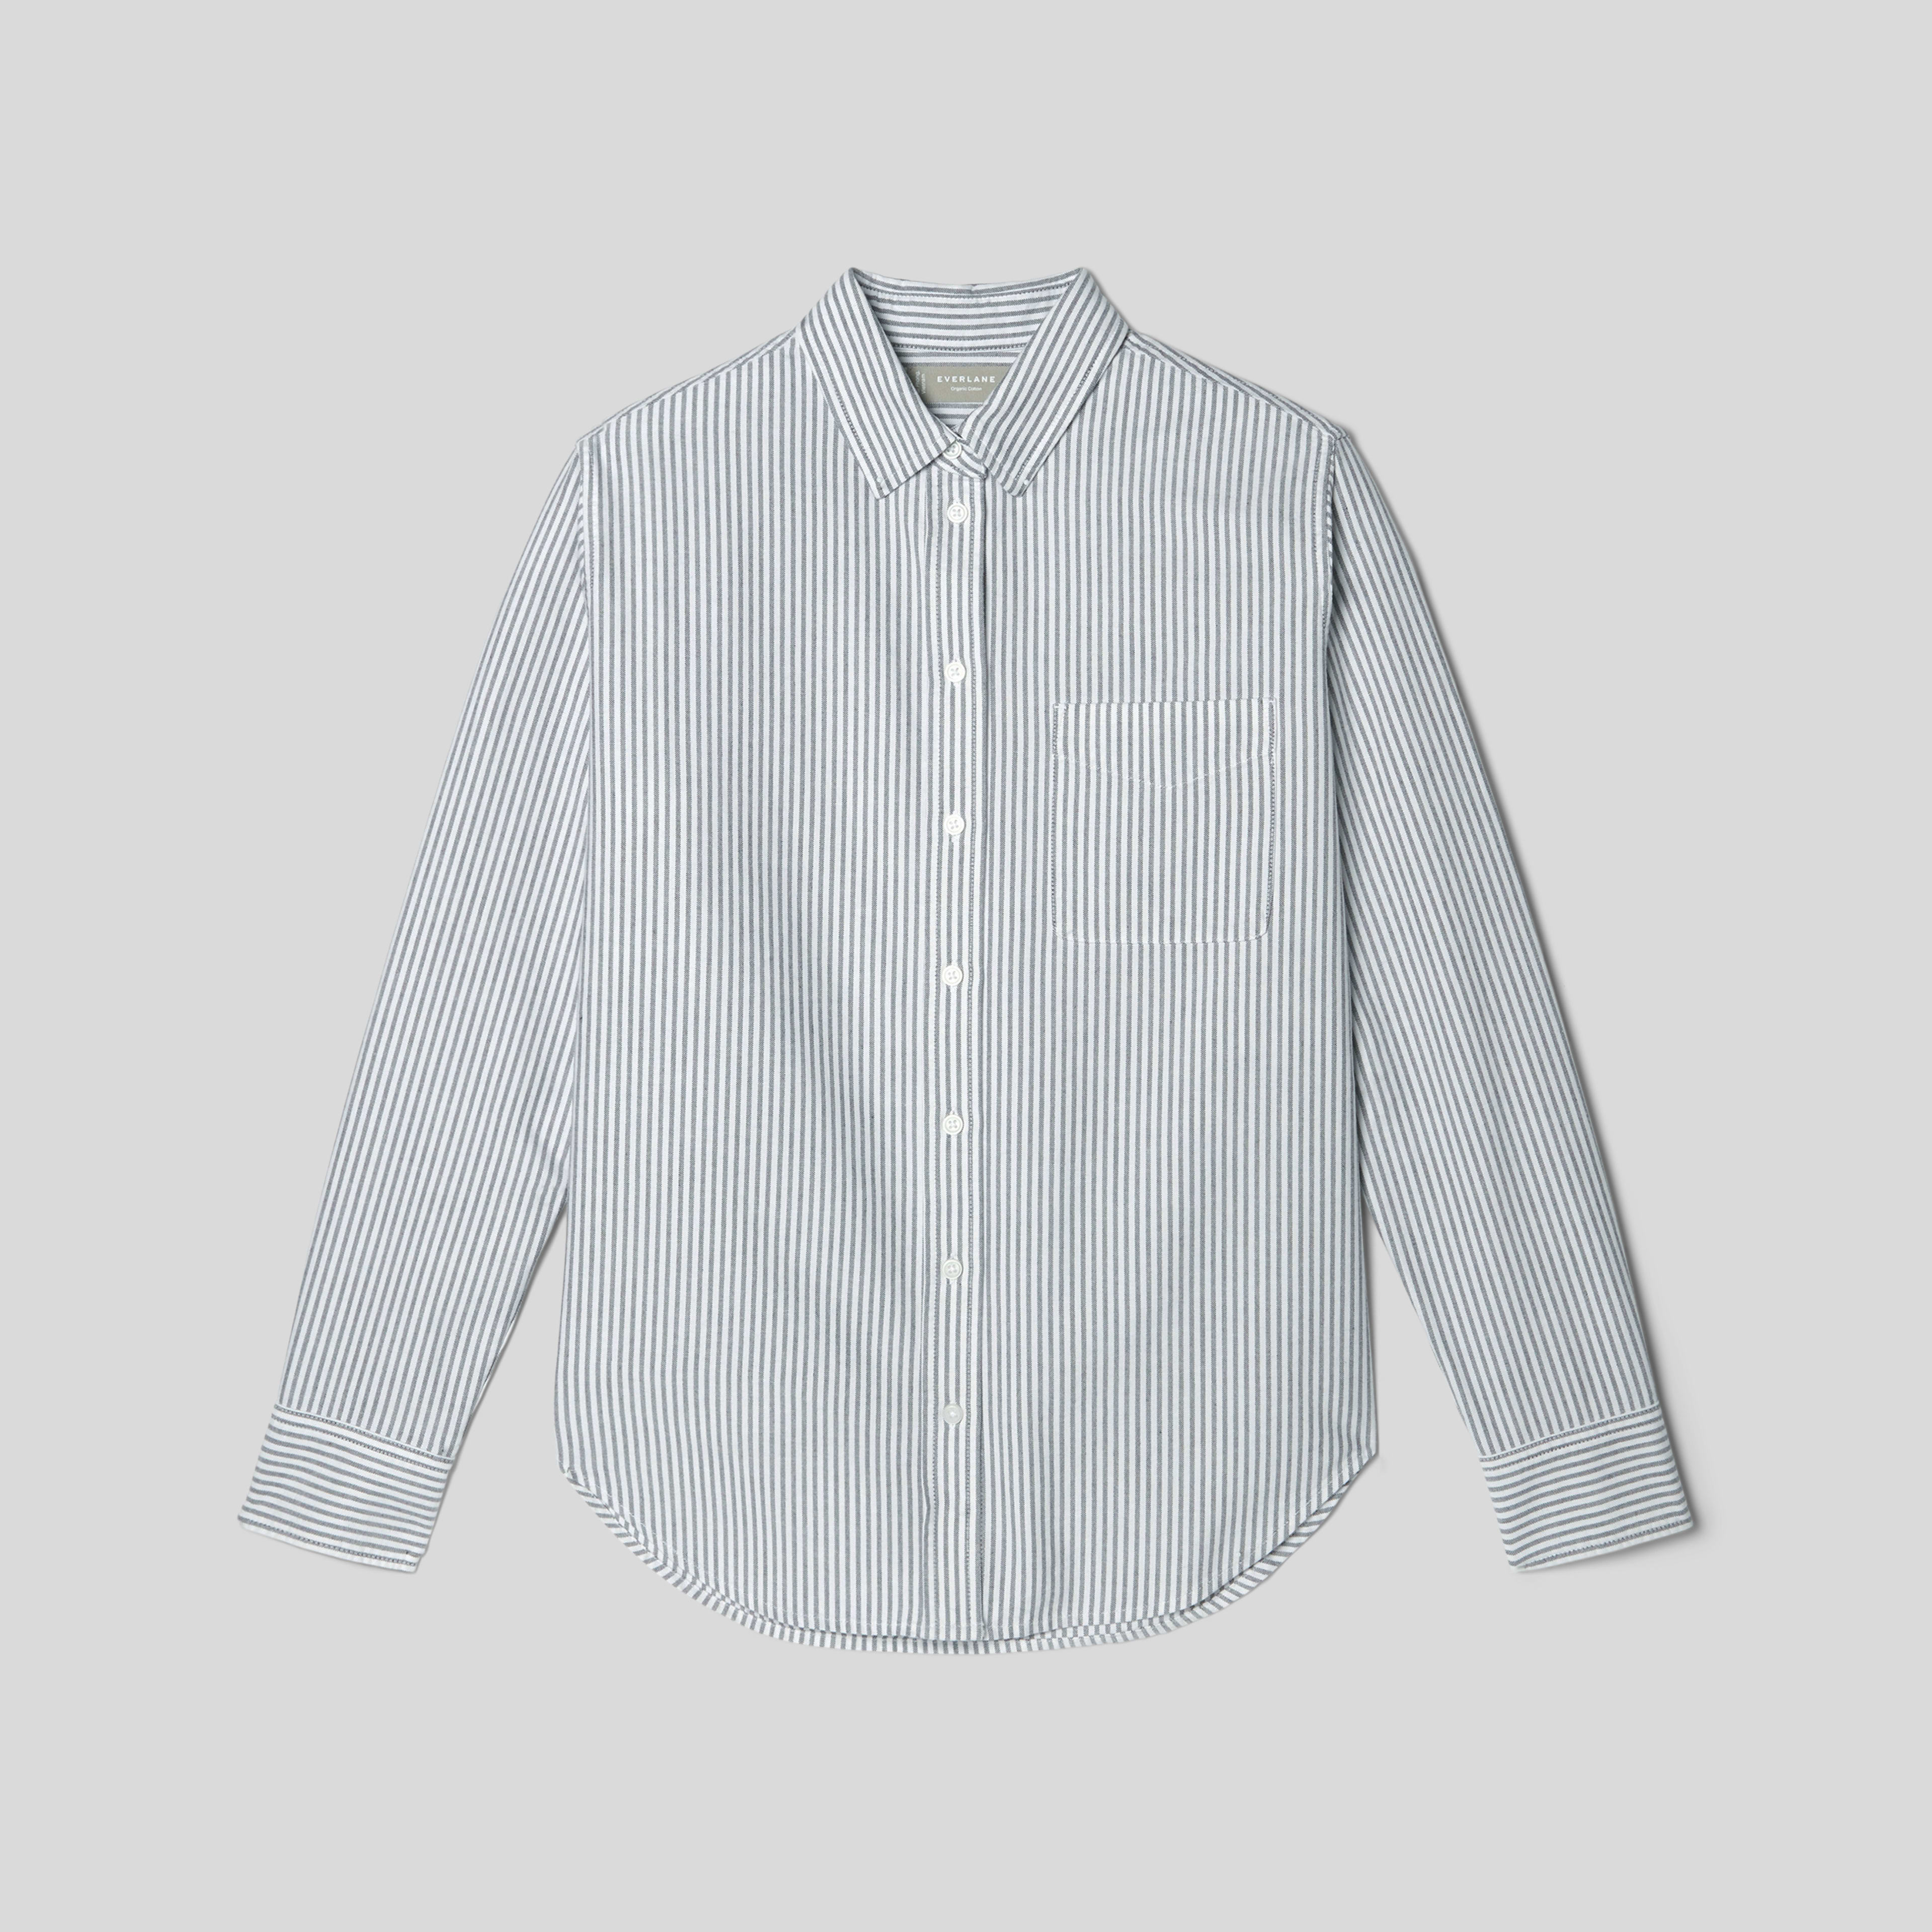 The Relaxed Oxford Shirt Black / White – Everlane